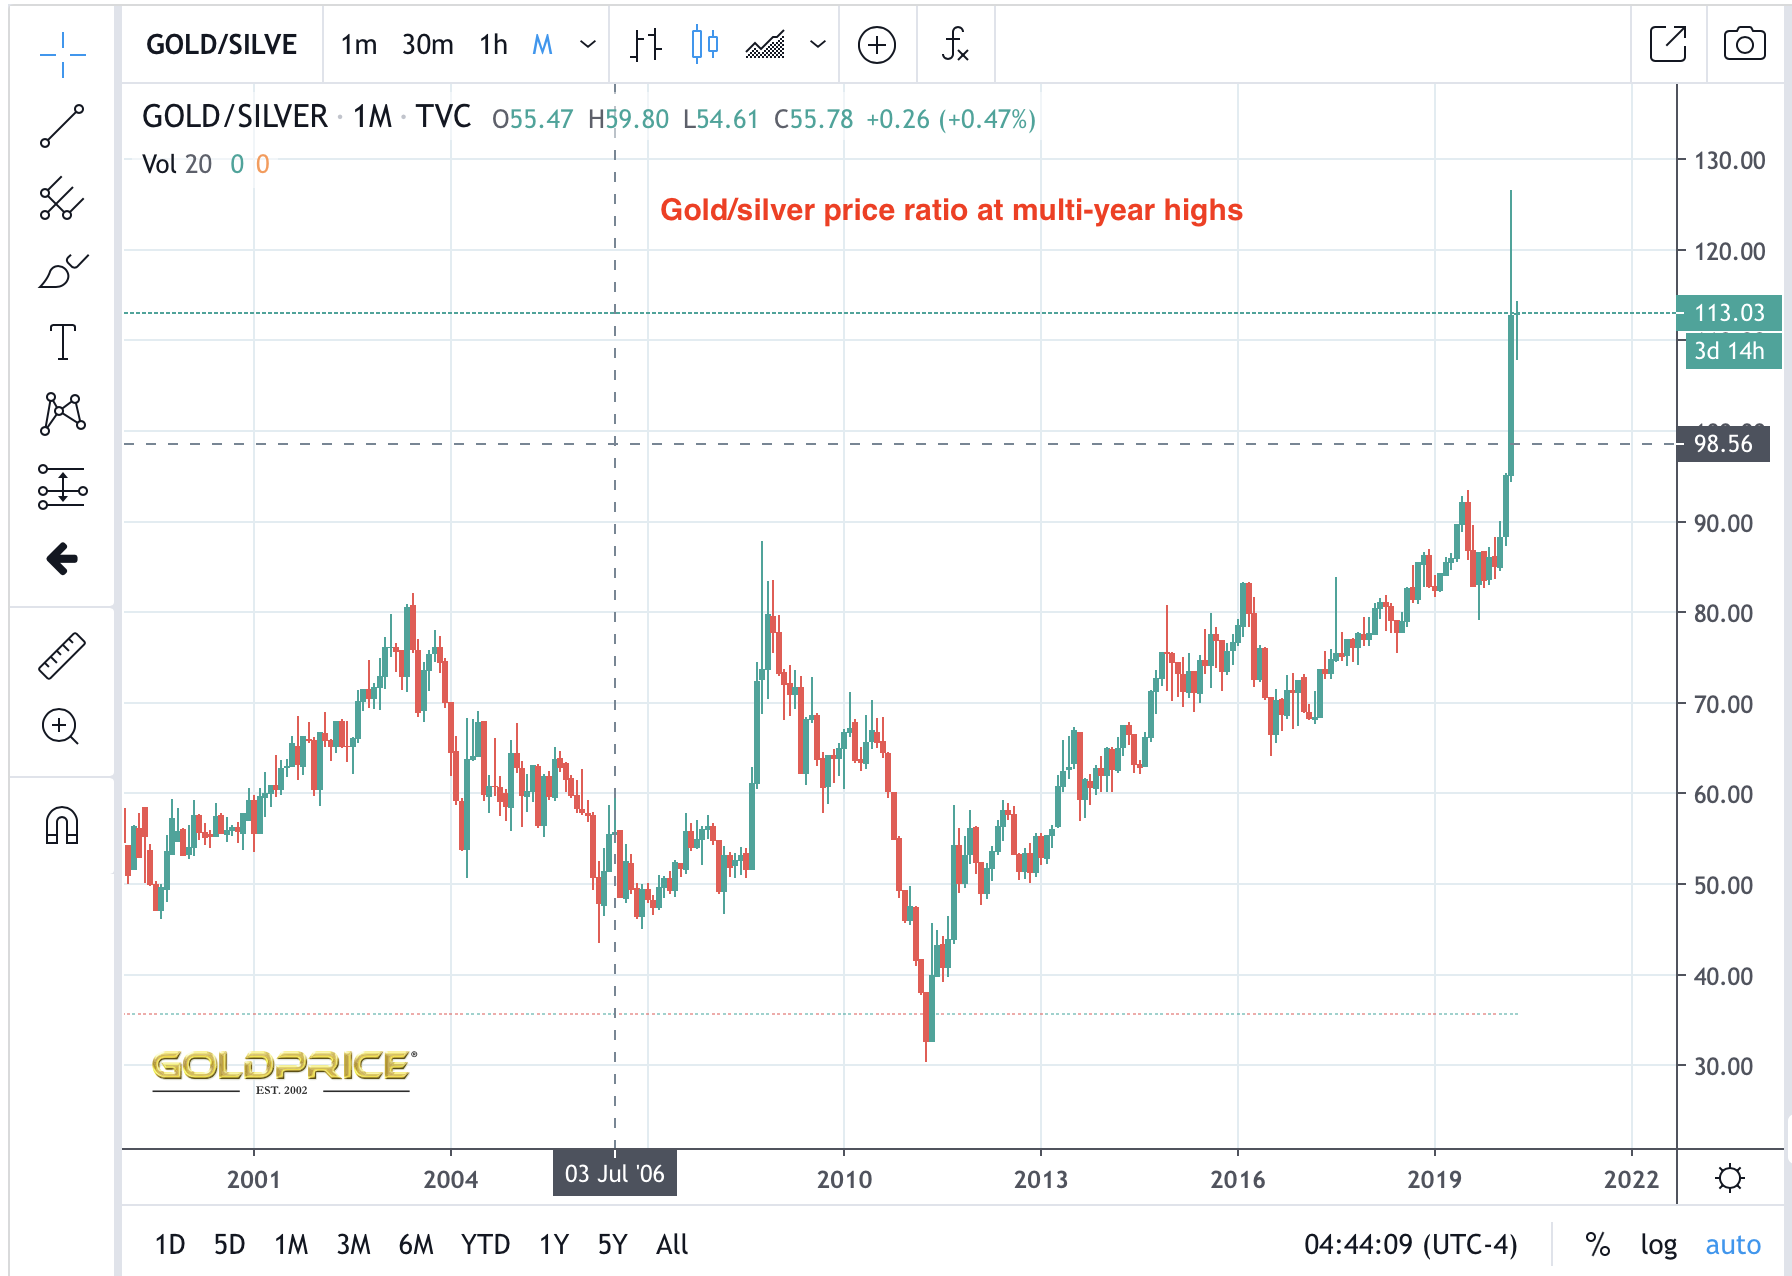 The problem of silver's oversupply solved by gold's price 